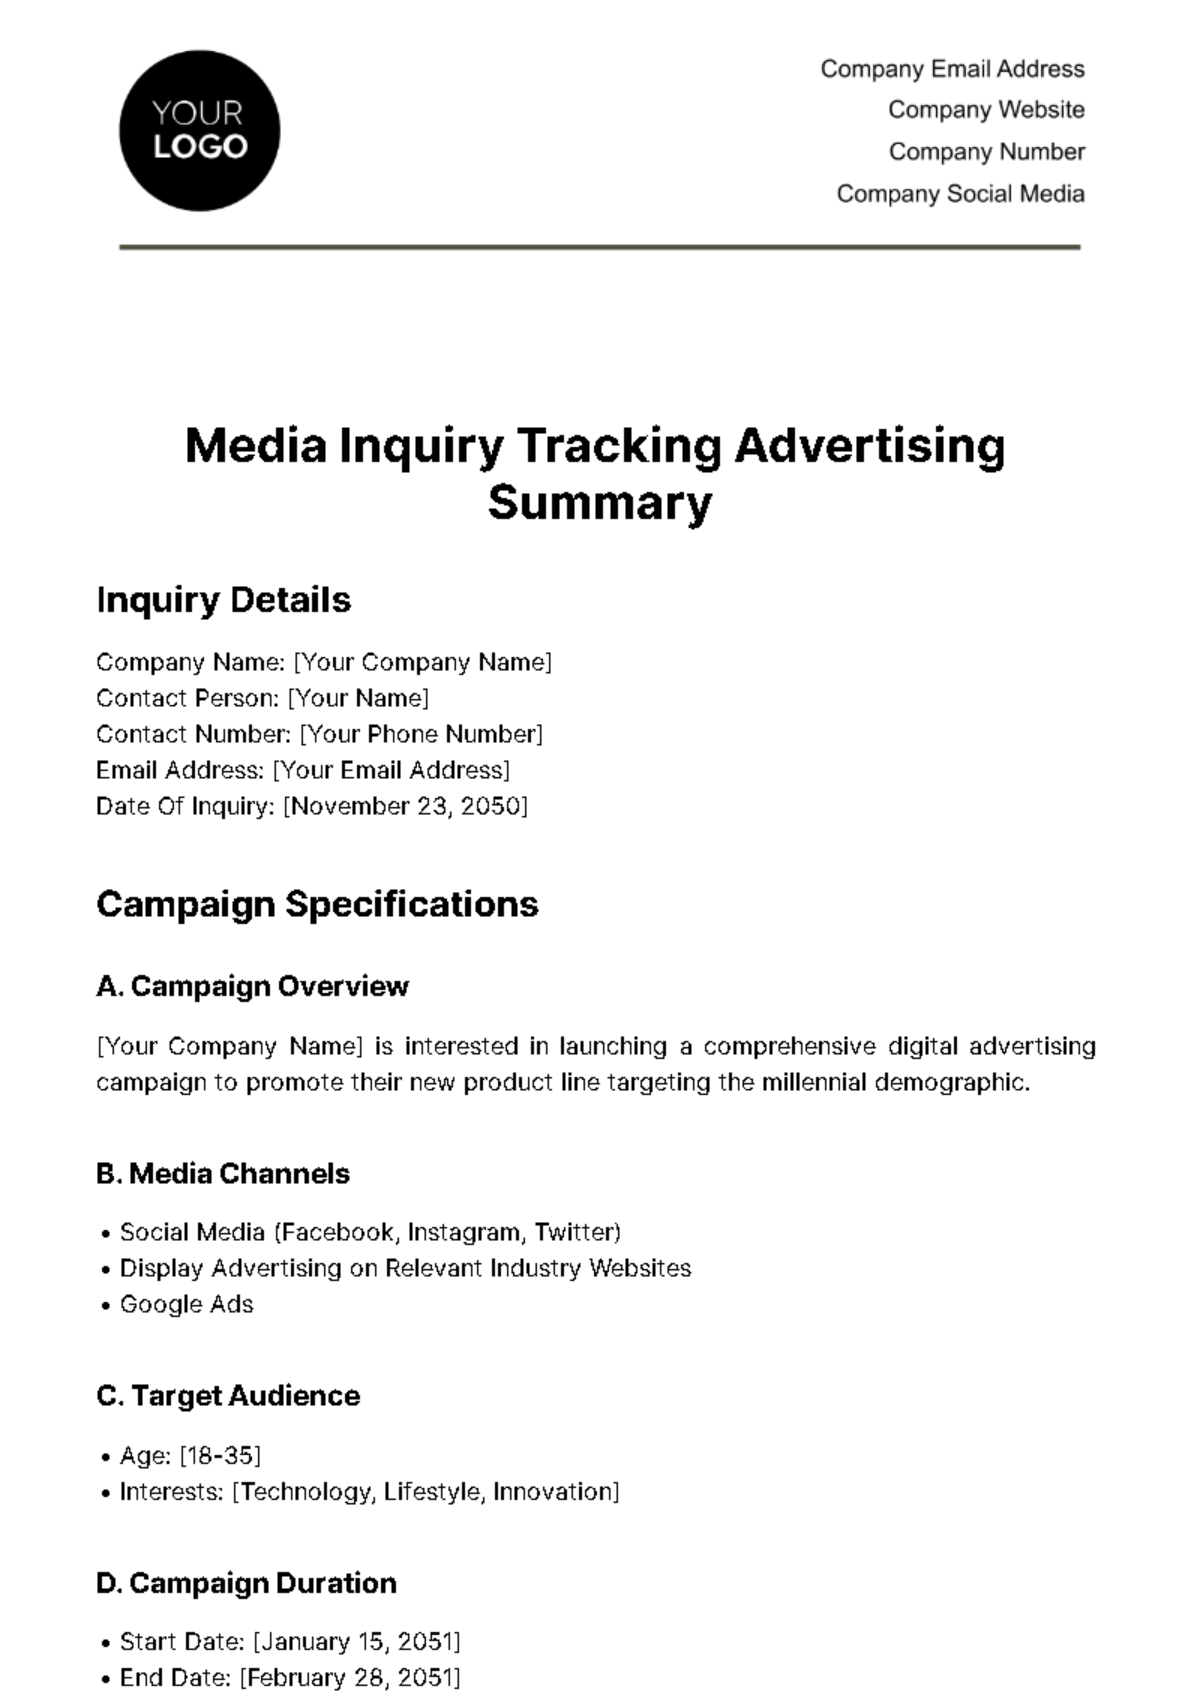 Media Inquiry Tracking Advertising Summary Template